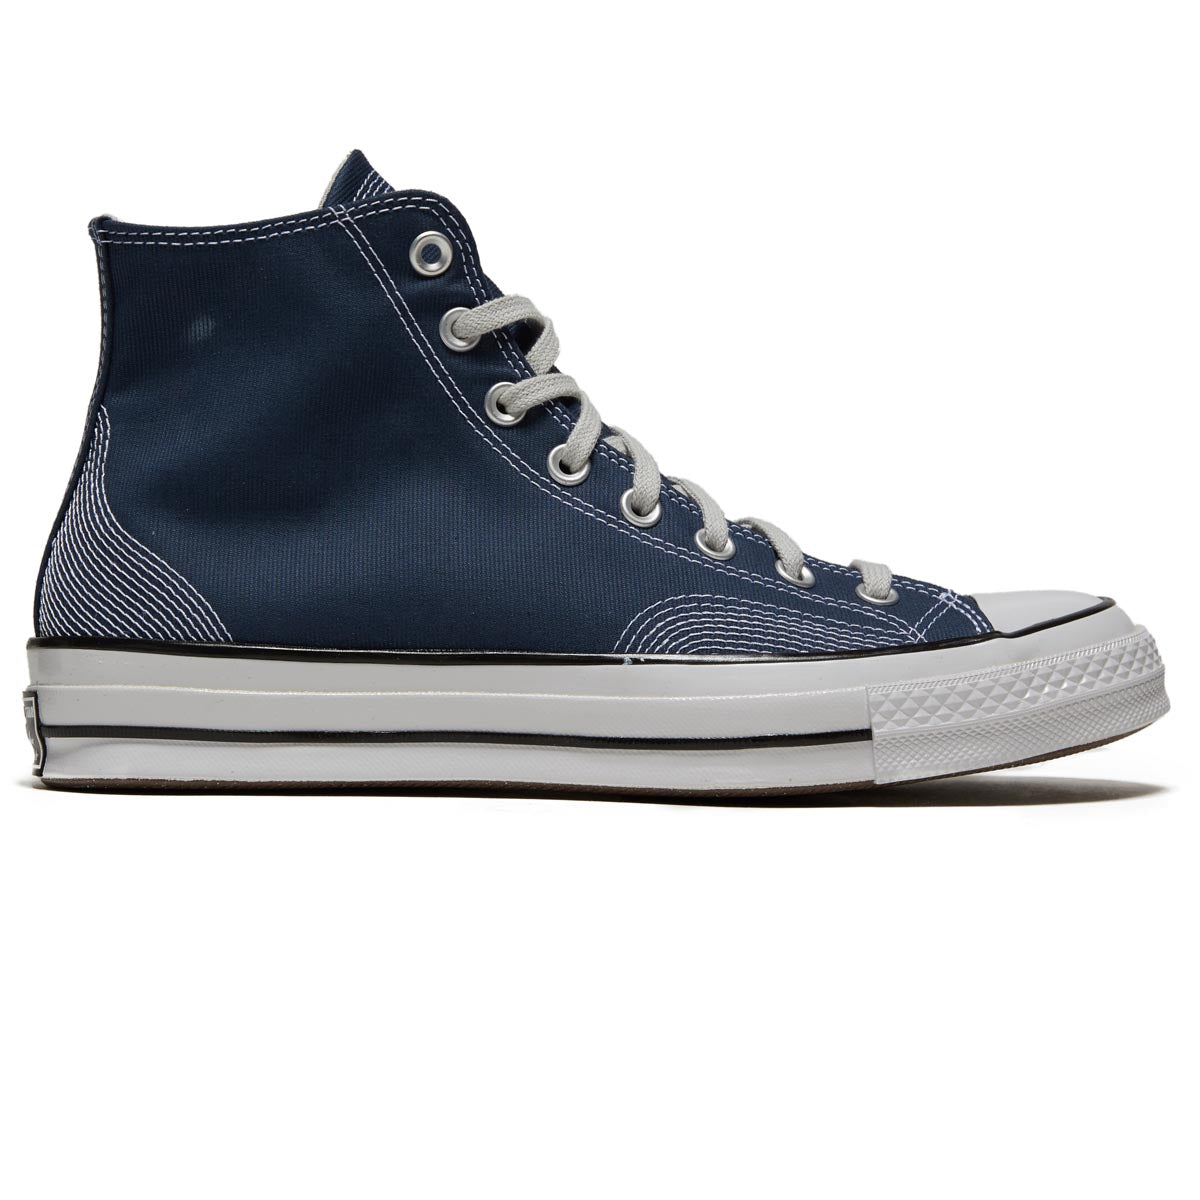 Converse Chuck 70 Hi Shoes - Navy/Fossilized/Fossilized image 1